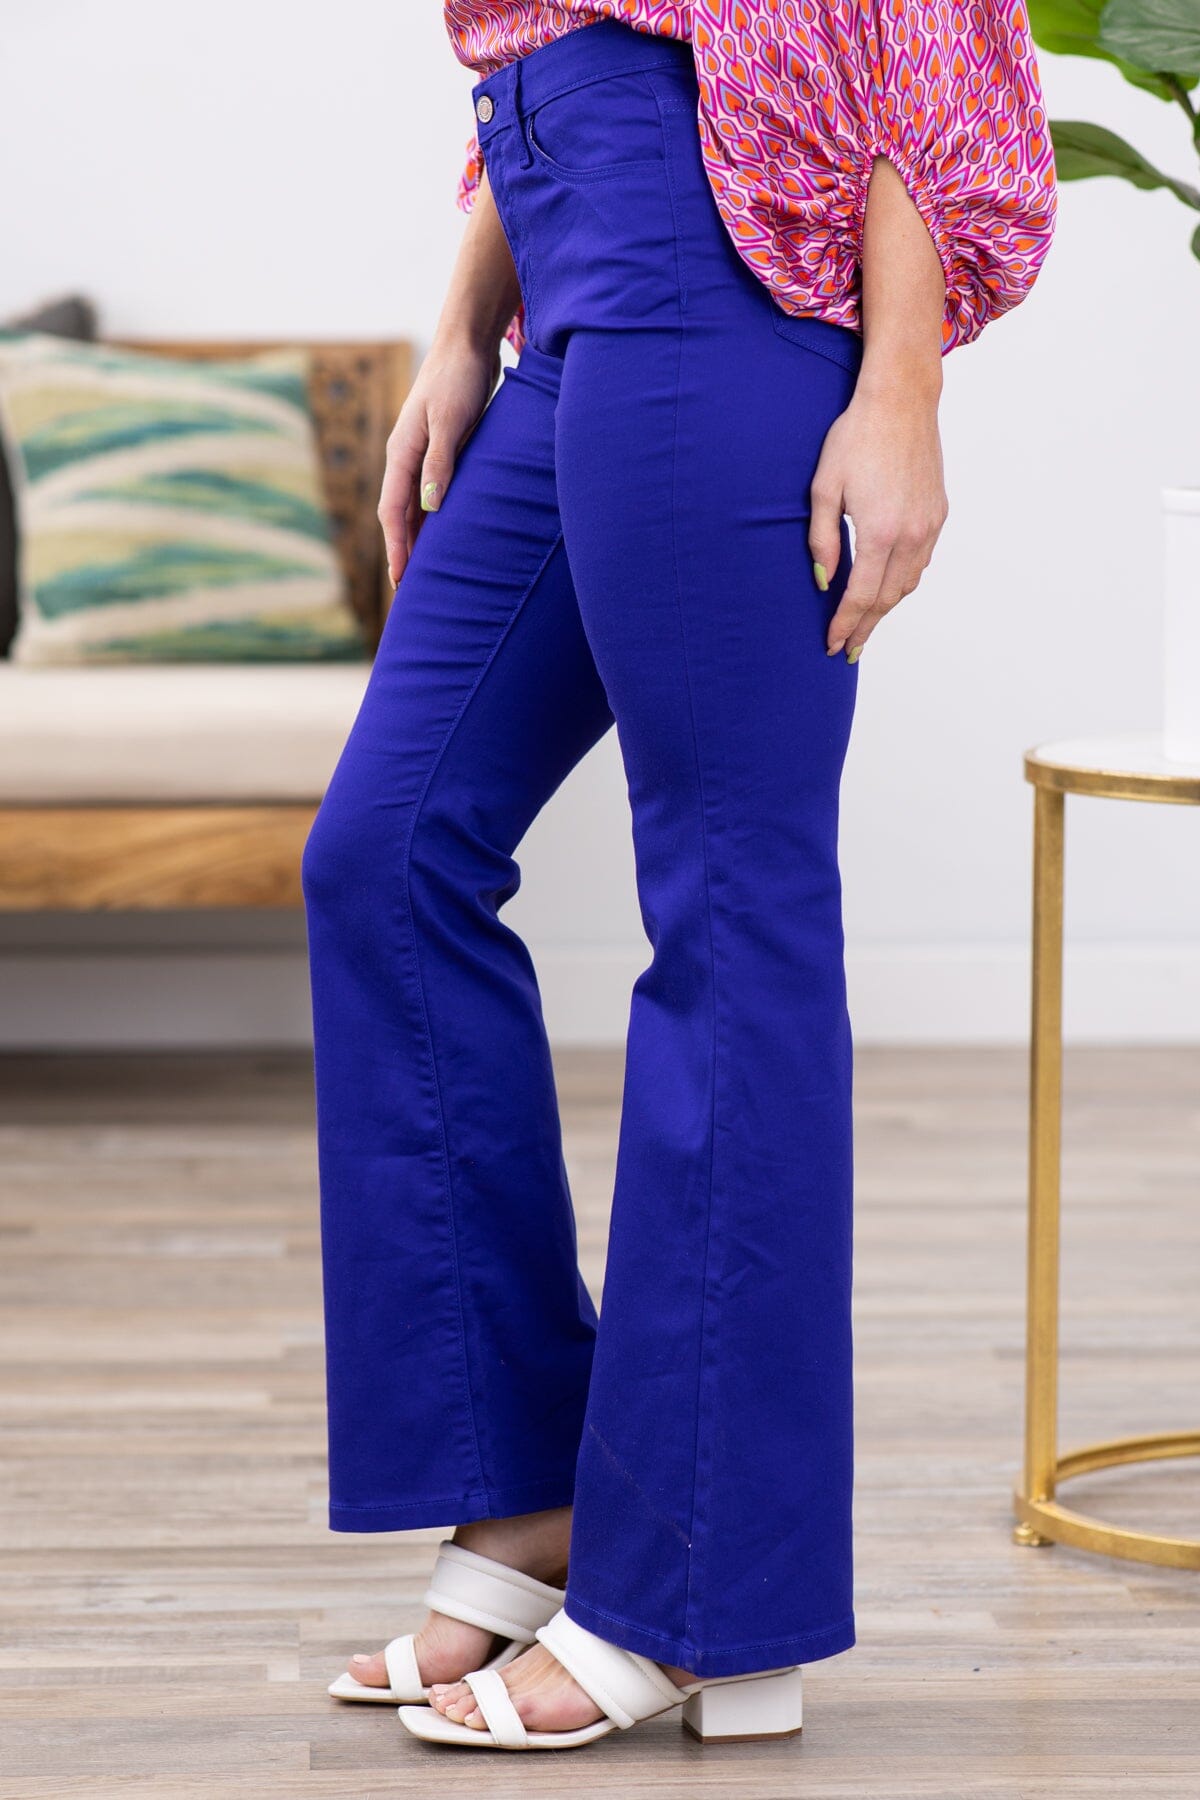 Zenana Cobalt Bootcut Pants With Stretch - Filly Flair